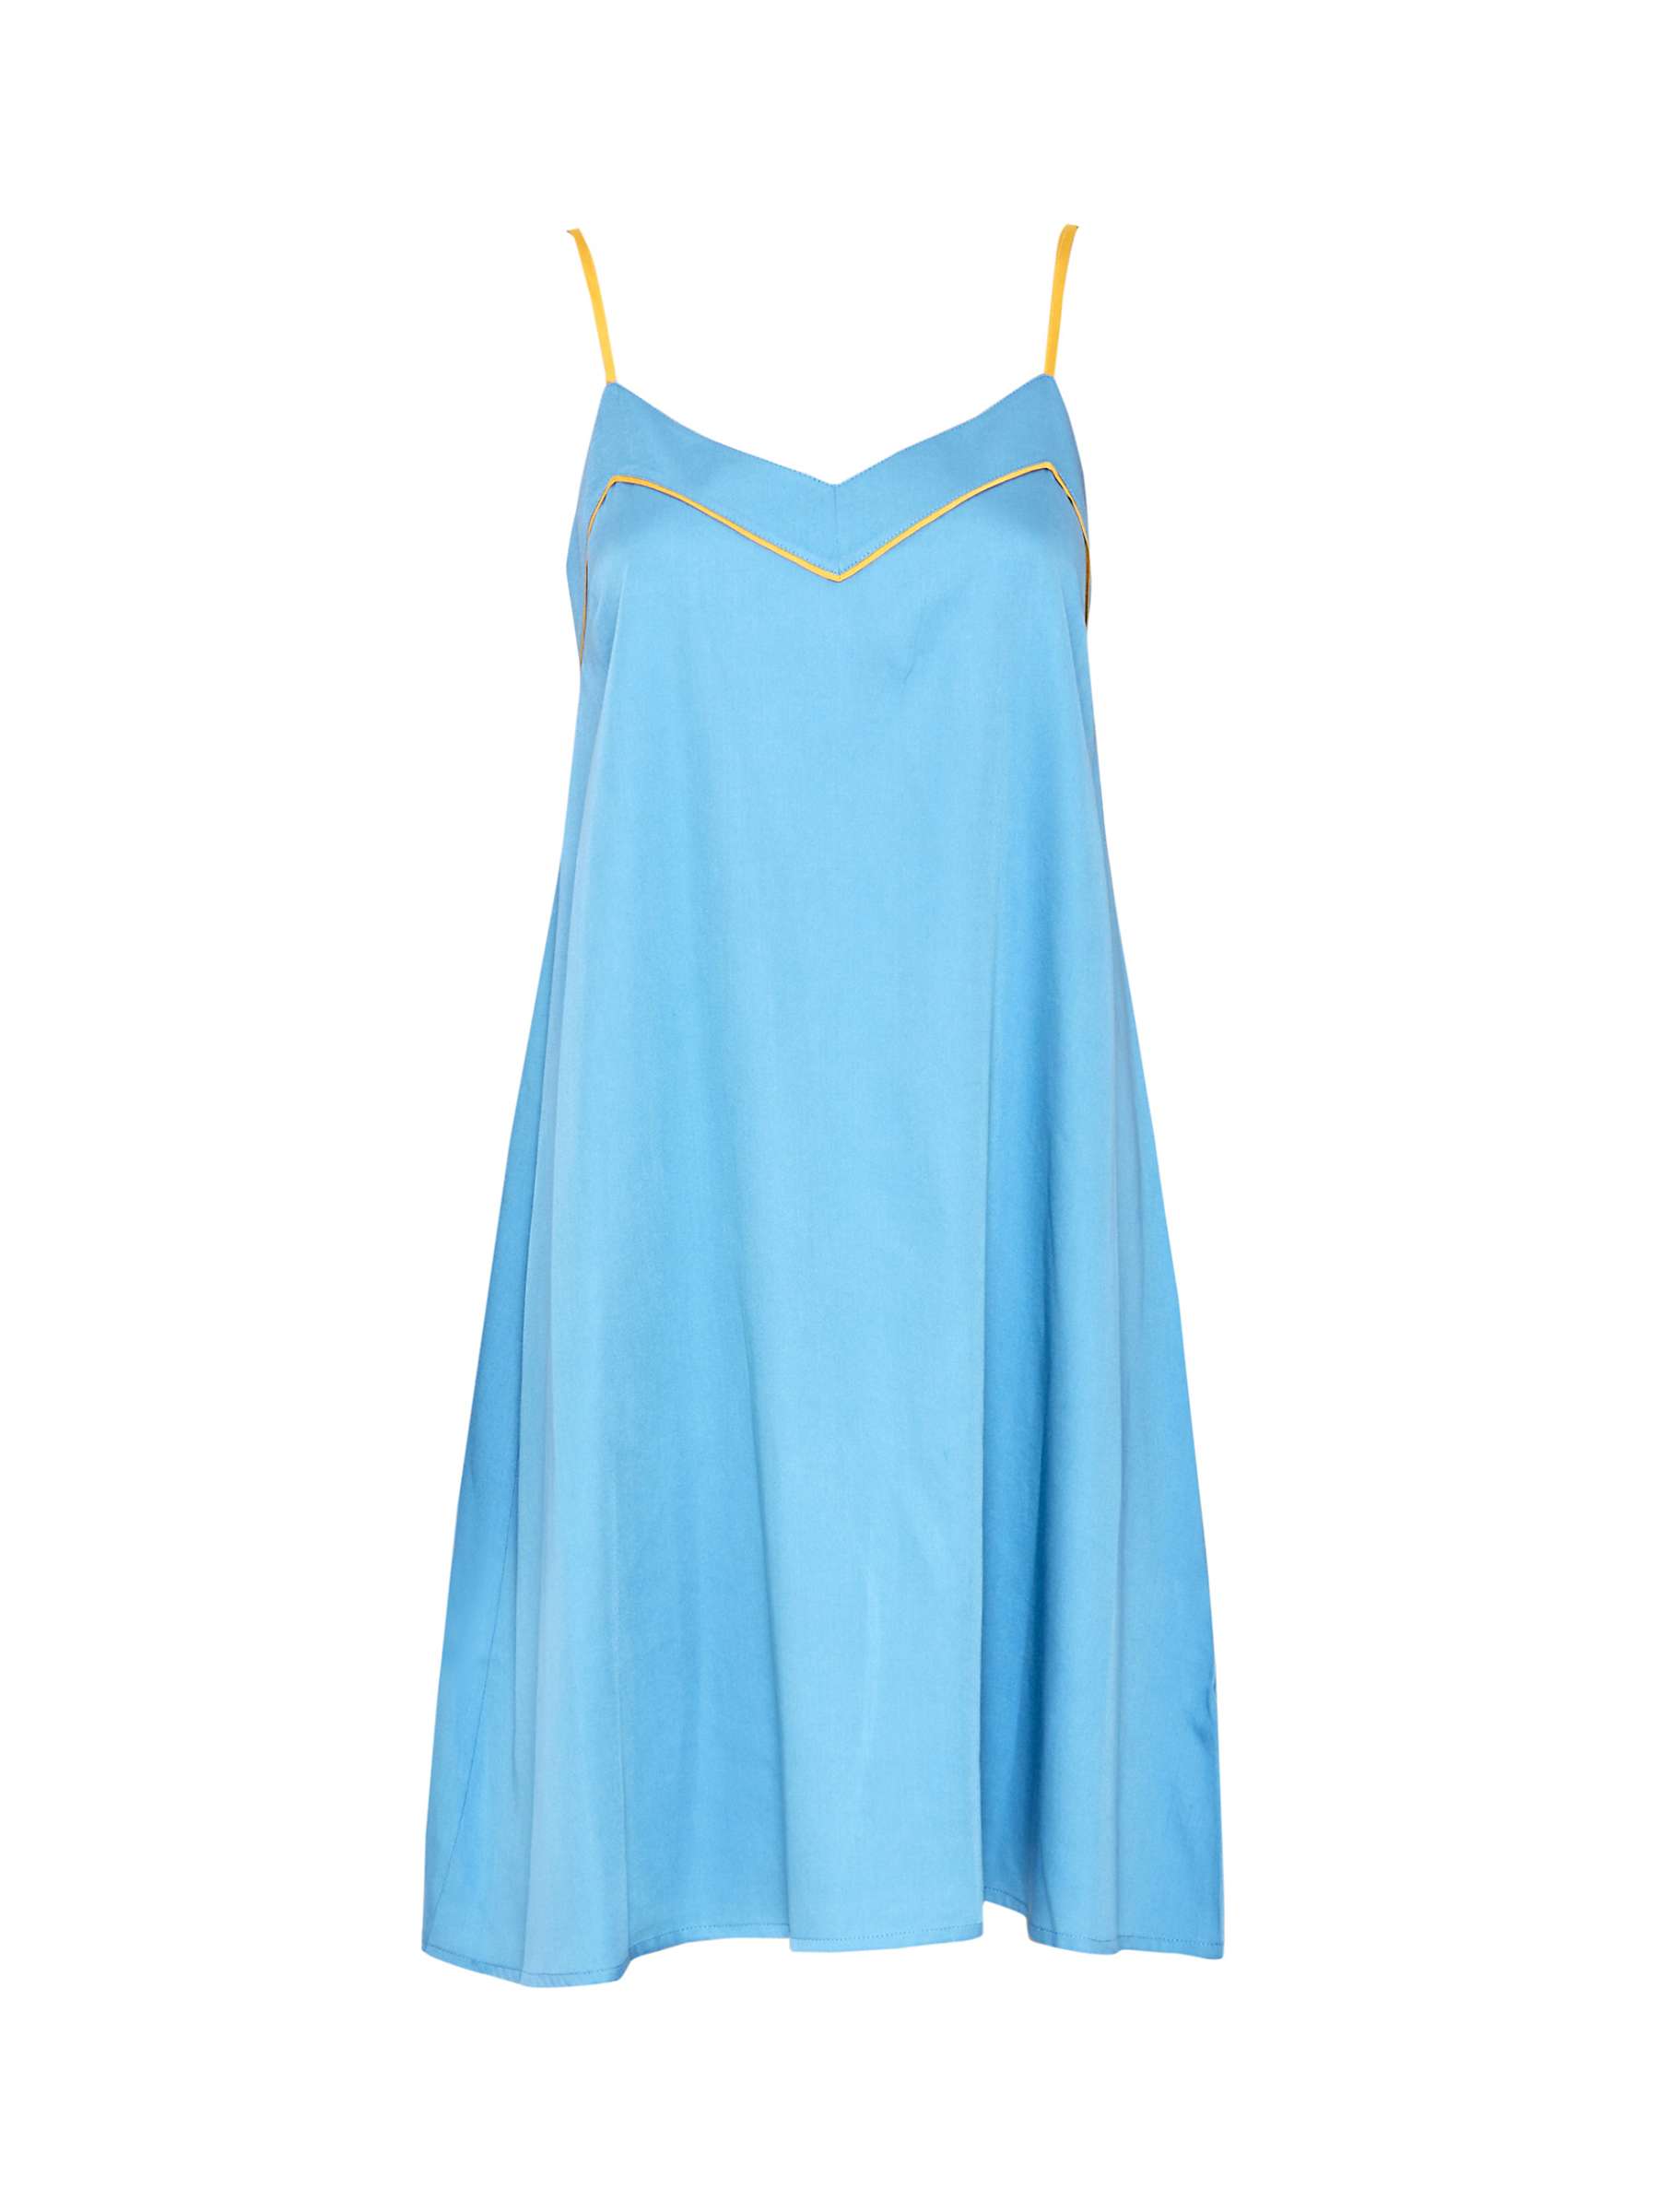 Buy Fable & Eve Greenwich Solid Nightdress, Cerulean Blue Online at johnlewis.com